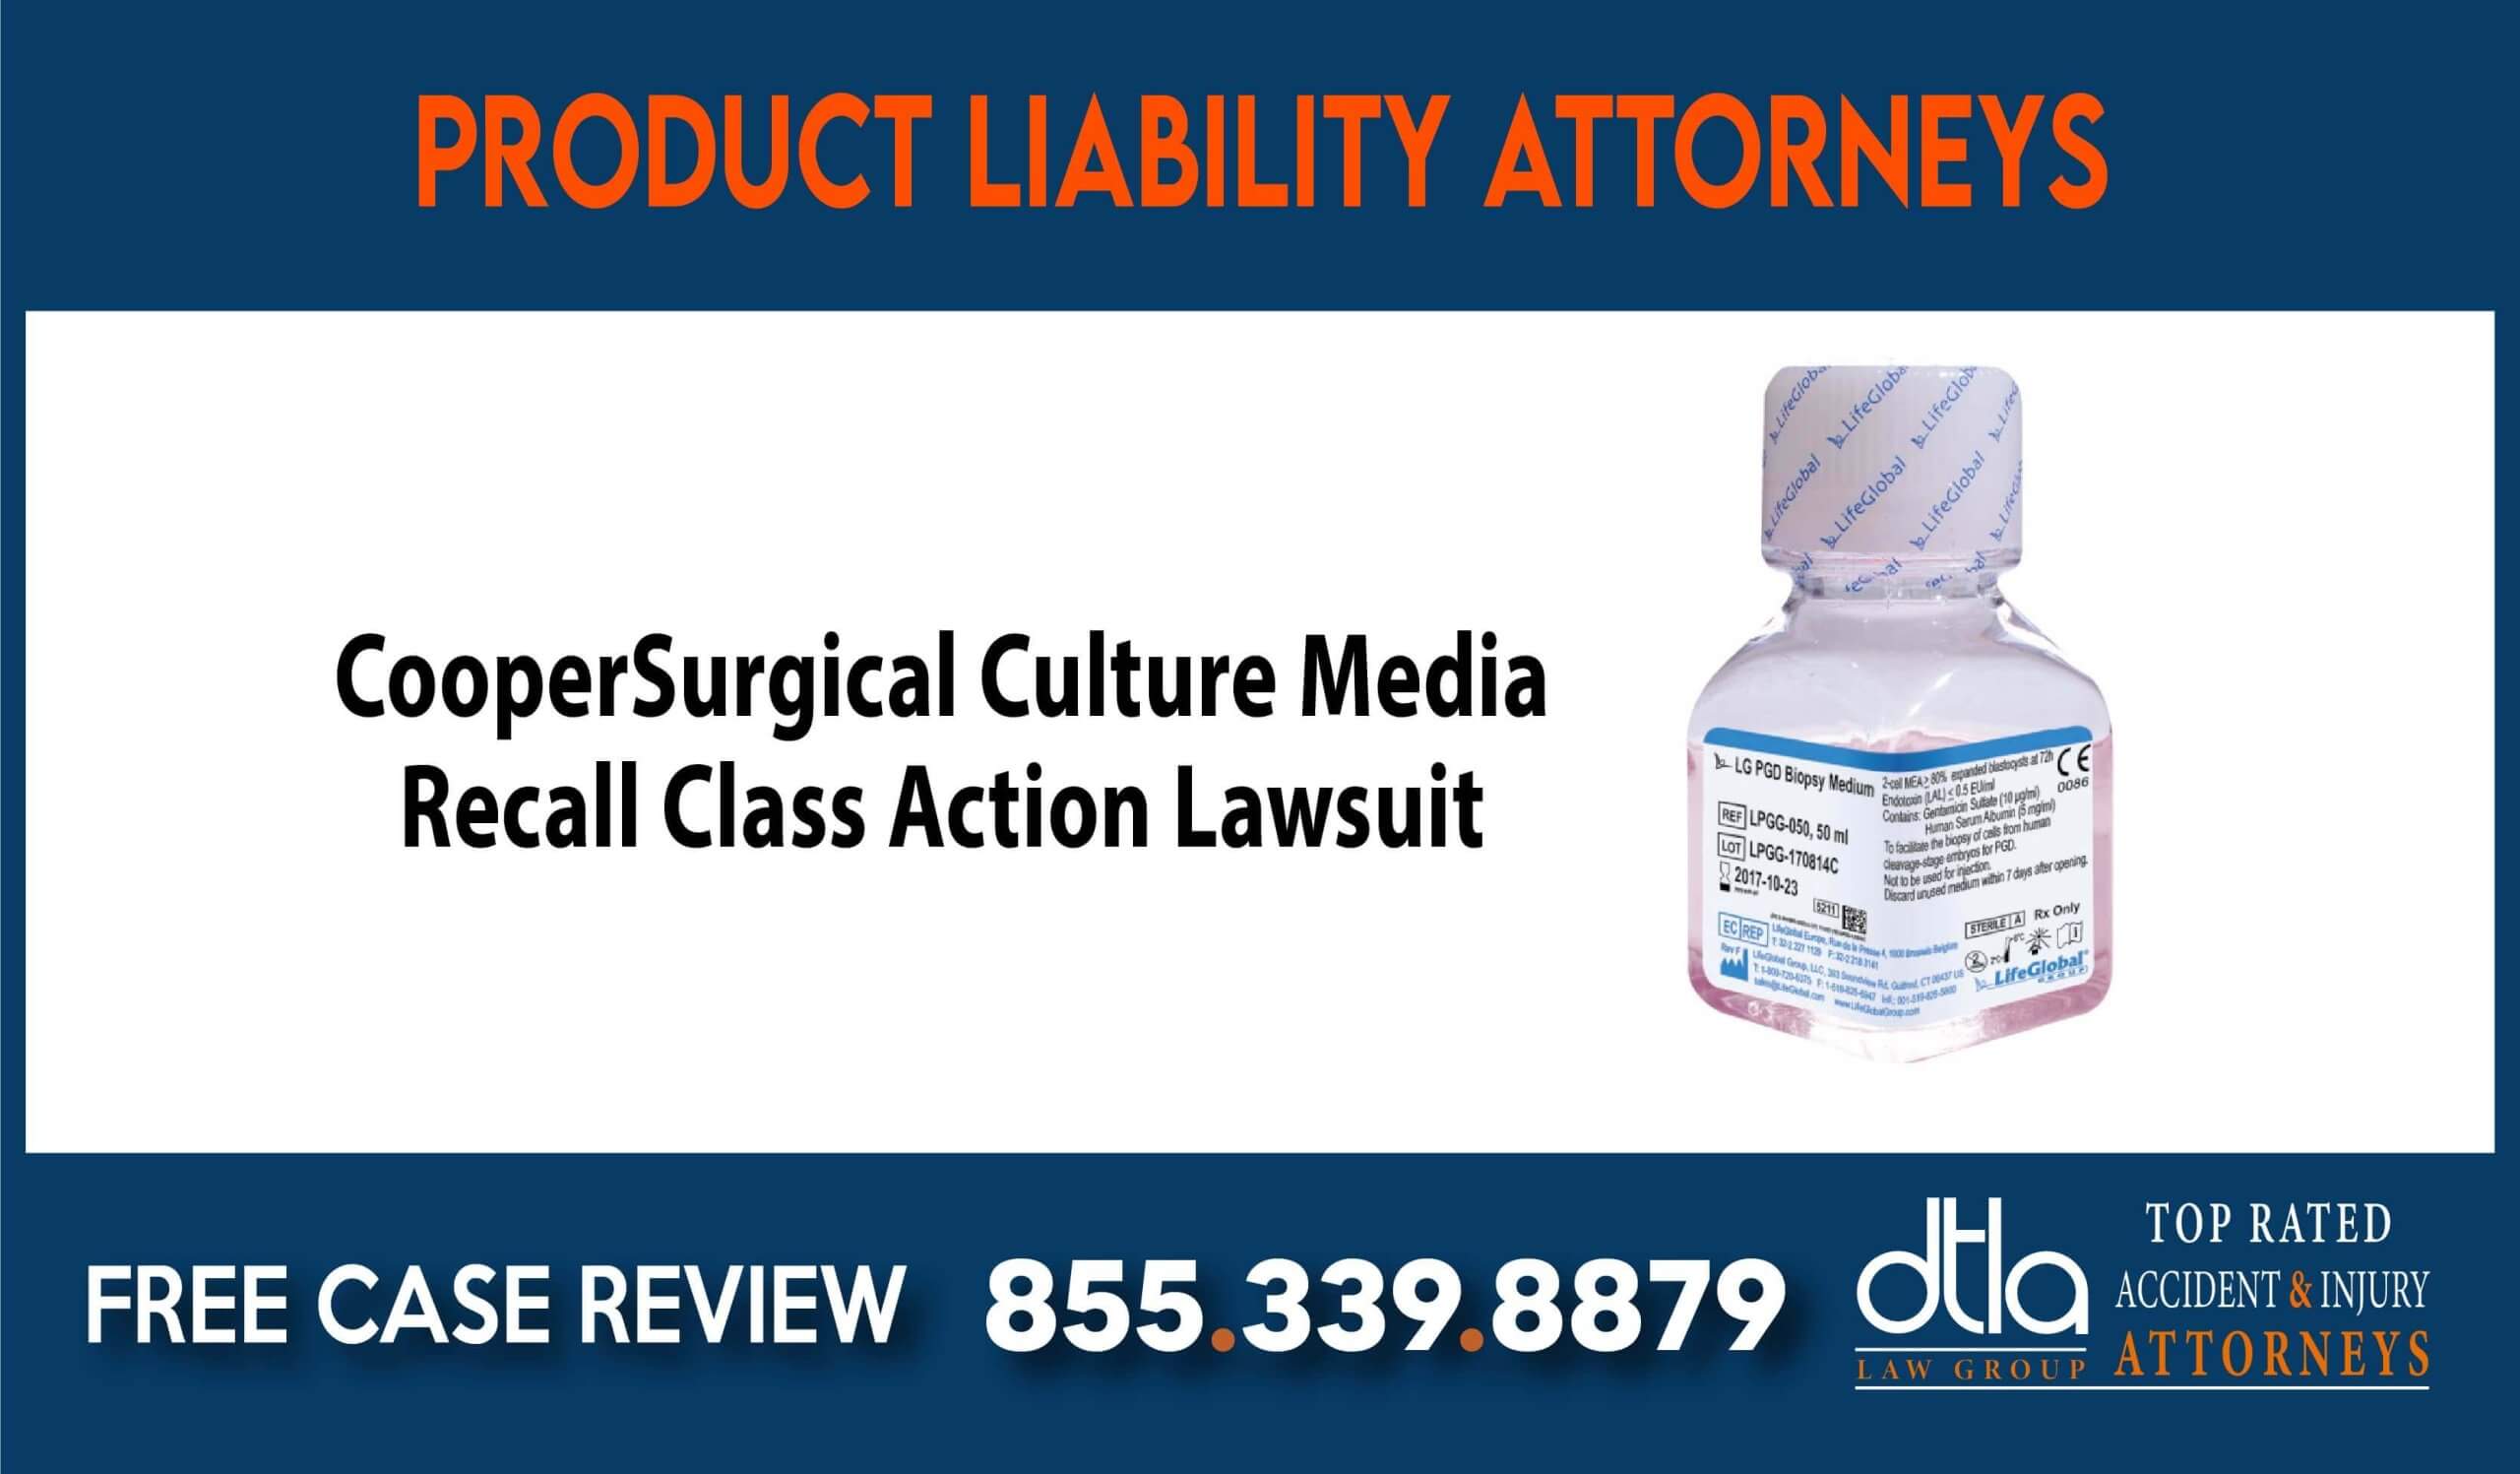 CooperSurgical Culture Media Recall Class Action Lawsuit sue compensation incident liability